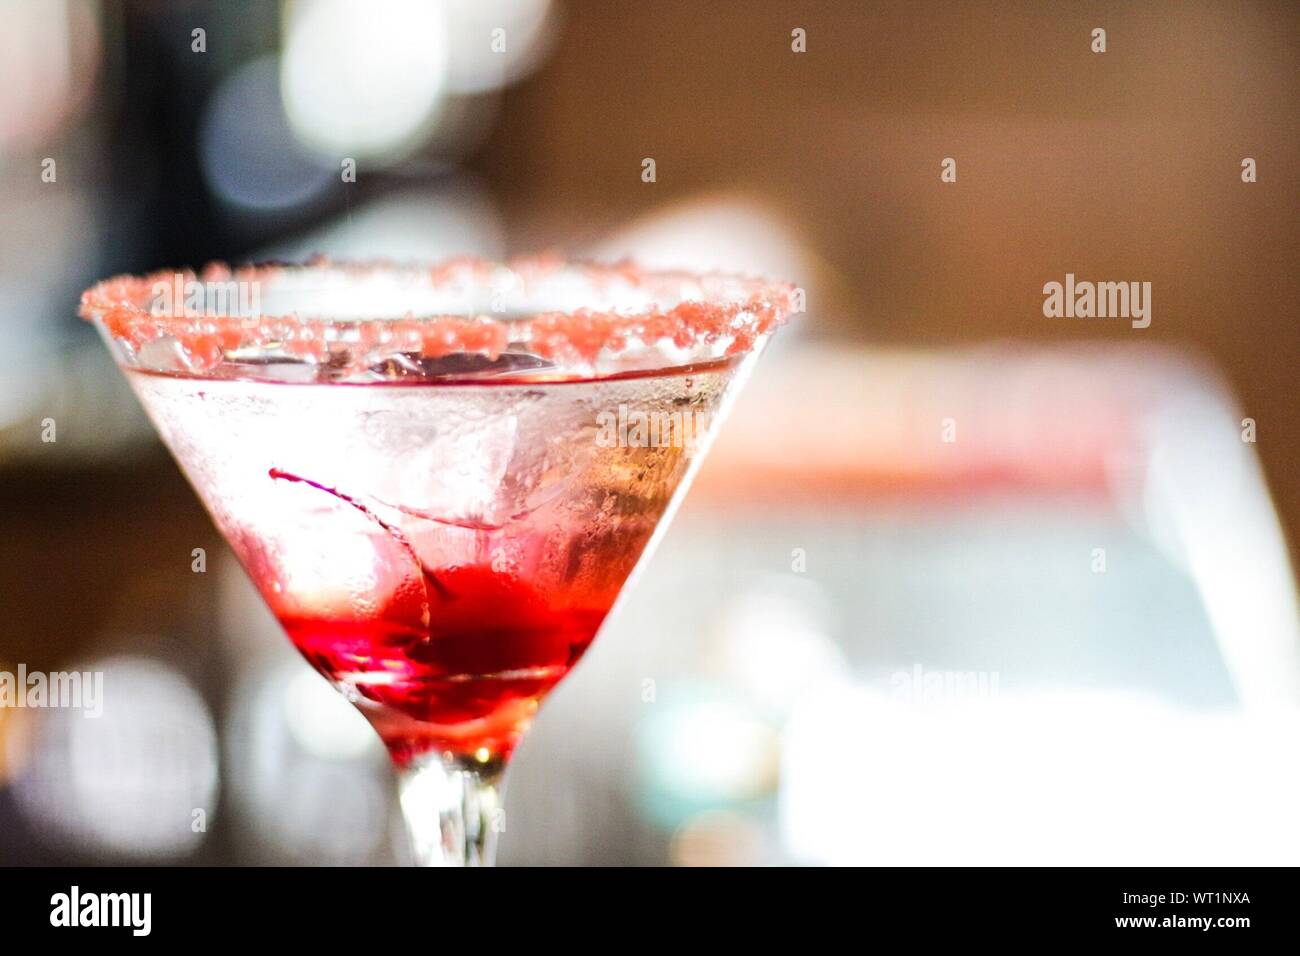 Close-up Of Drink In Martini Glass Stock Photo